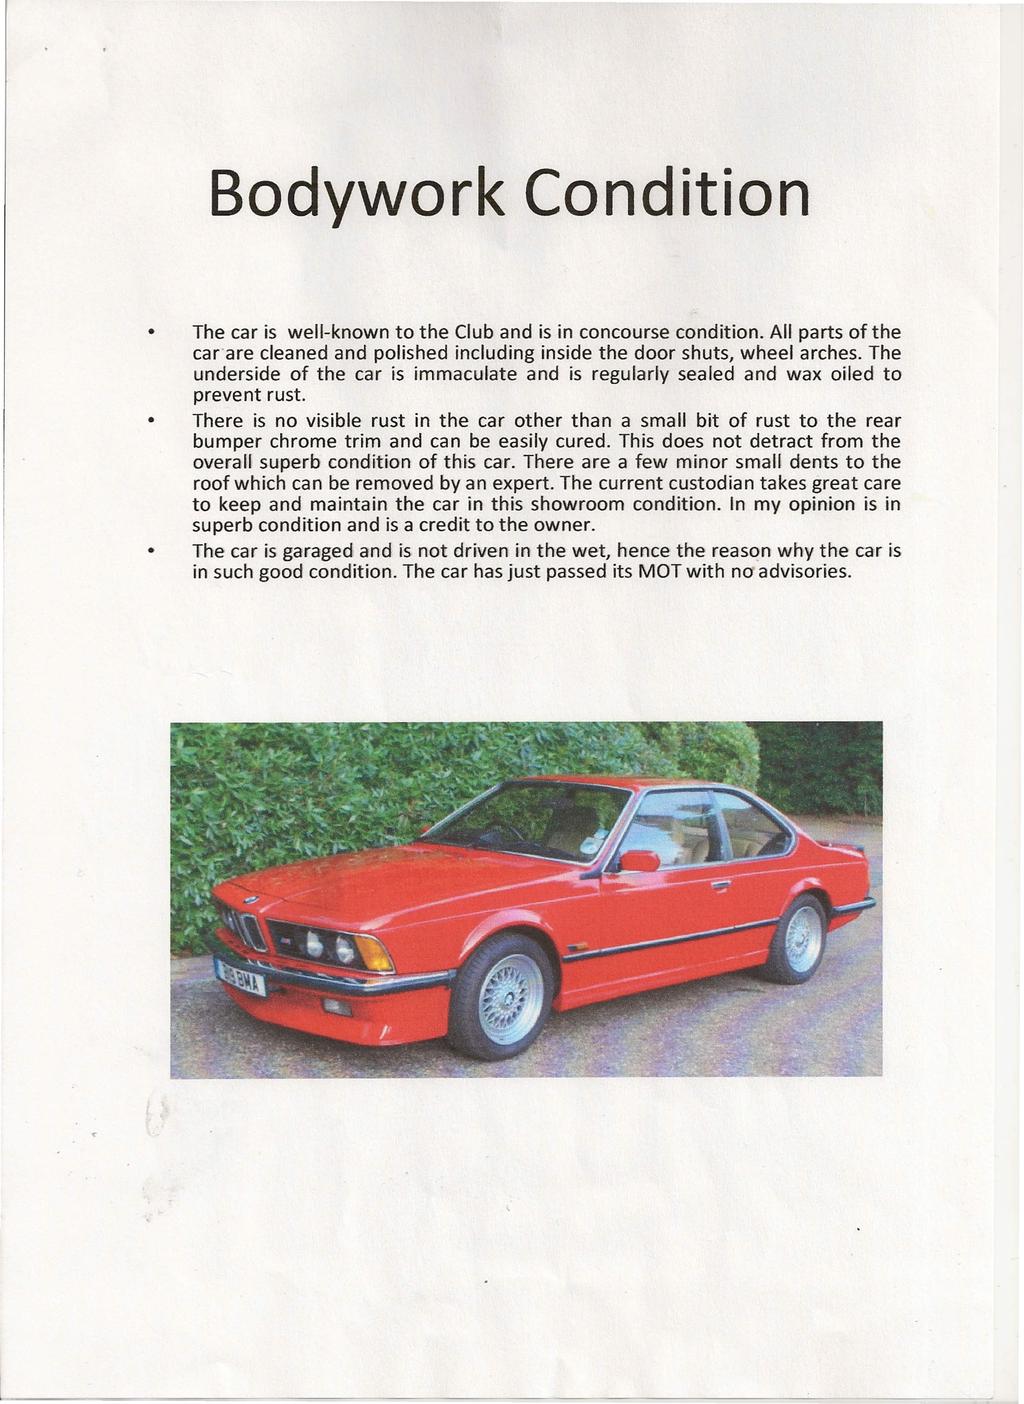 Bodywork Condition The car is well-known to the Club and is in concourse condition. All parts of the carare cleaned and polished including inside the door shuts, wheel arches.